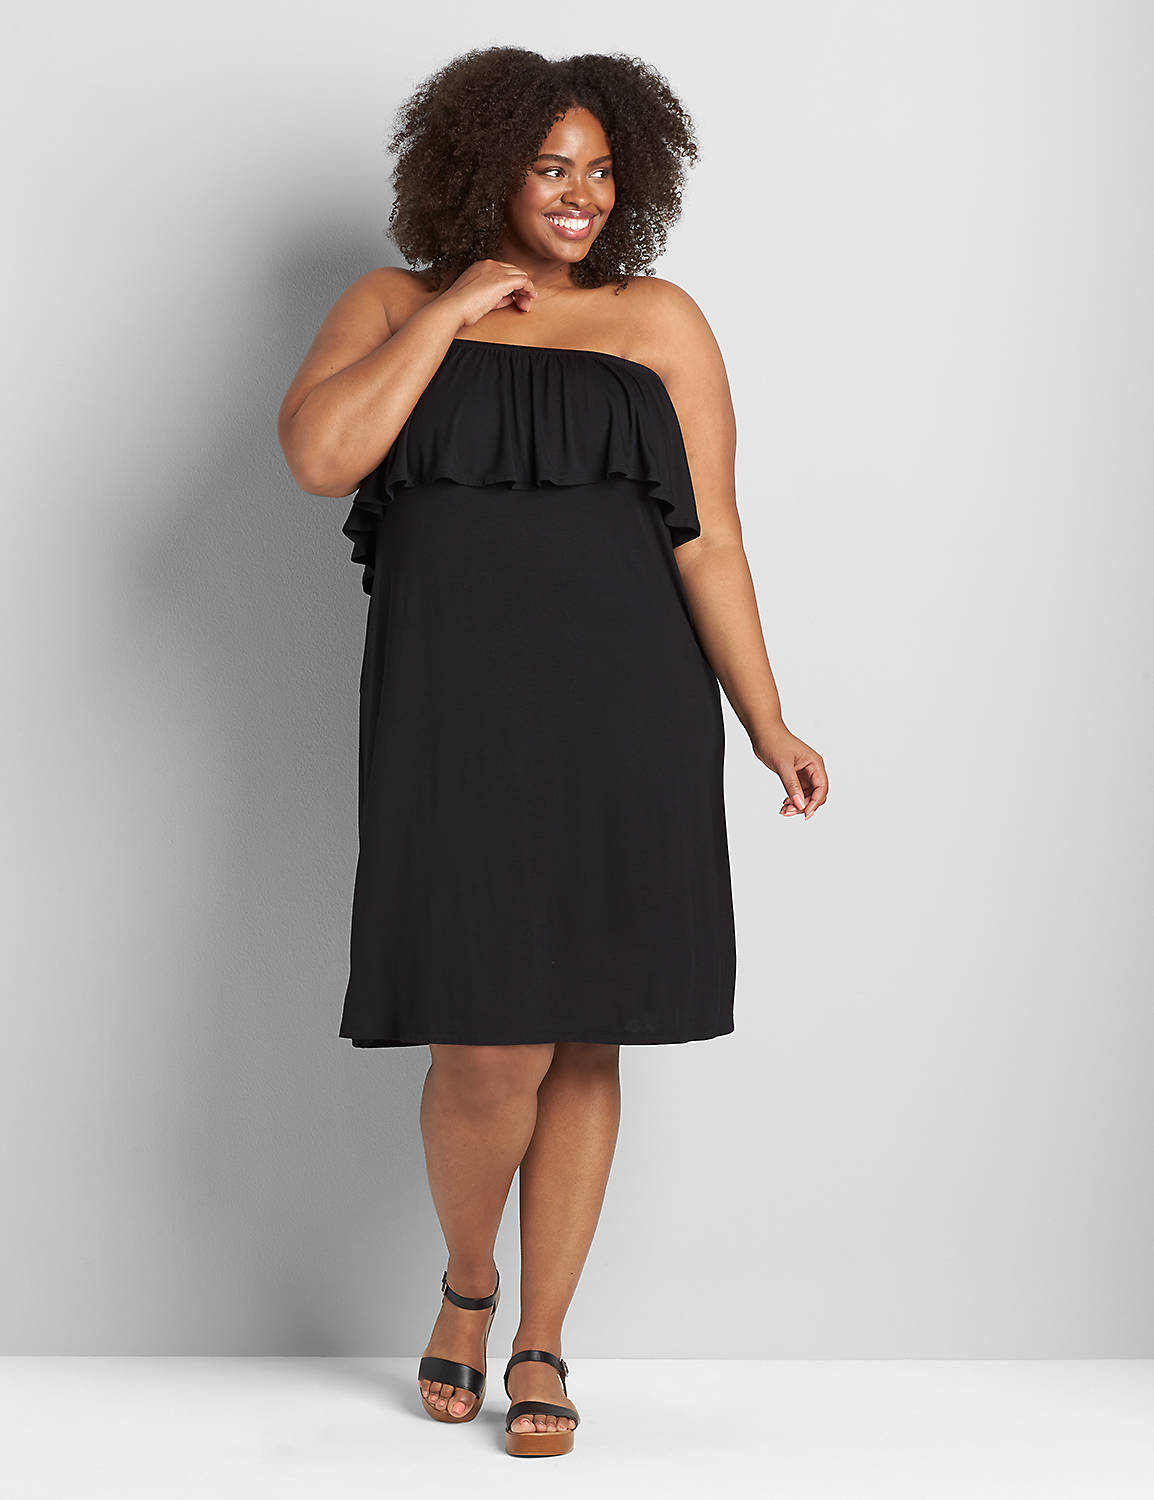 Convertible Off-The-Shoulder A-Line Dress Product Image 5